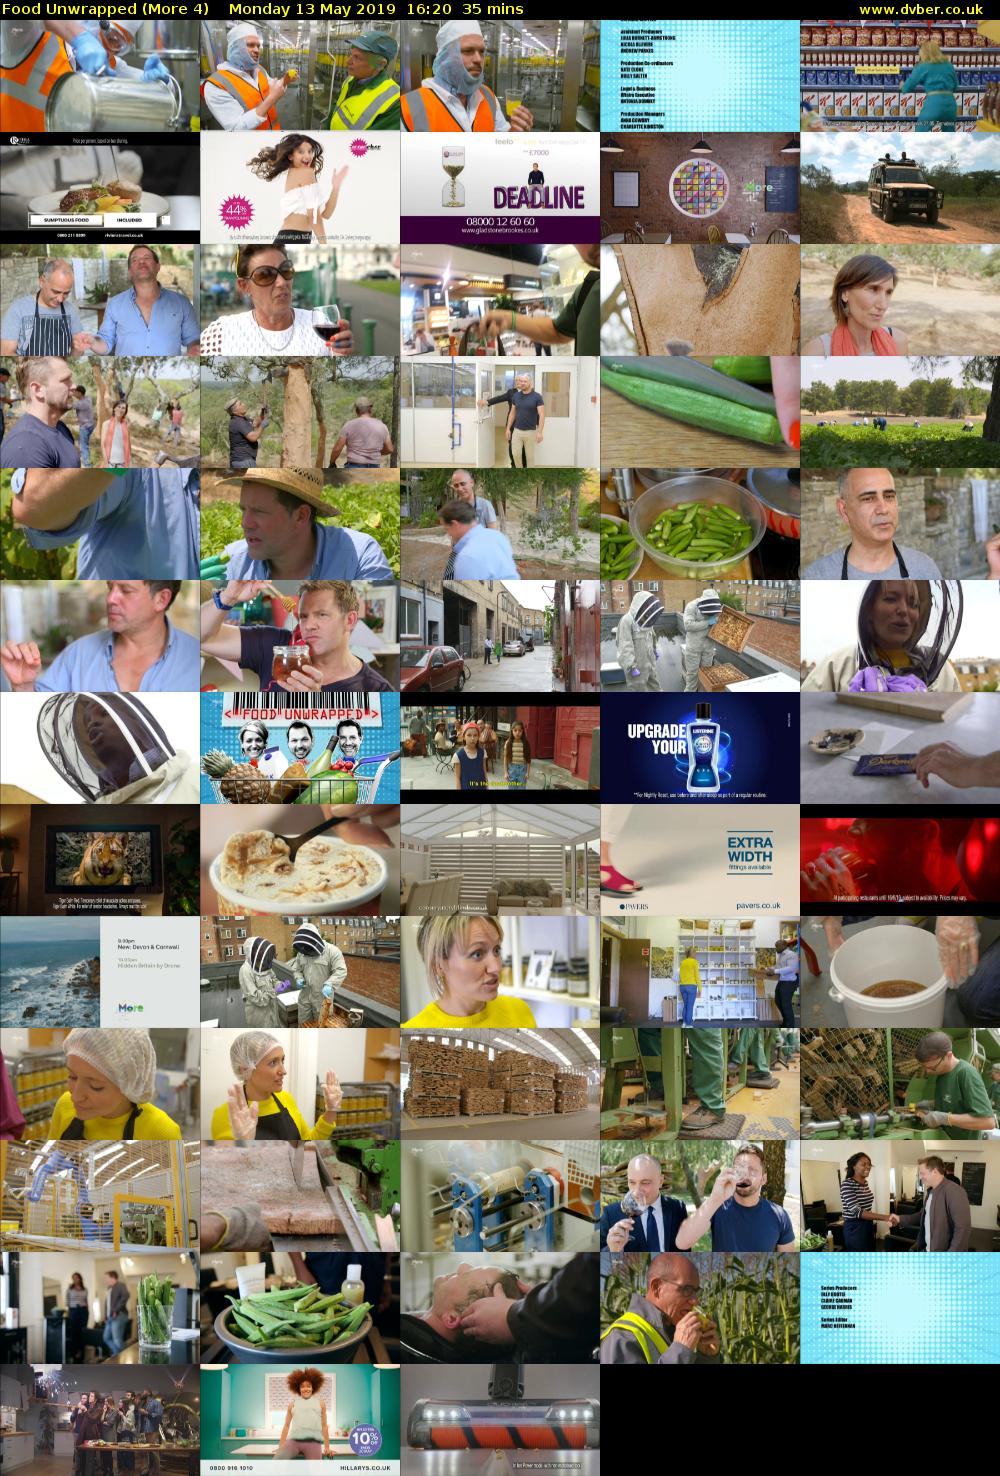 Food Unwrapped (More 4) Monday 13 May 2019 16:20 - 16:55